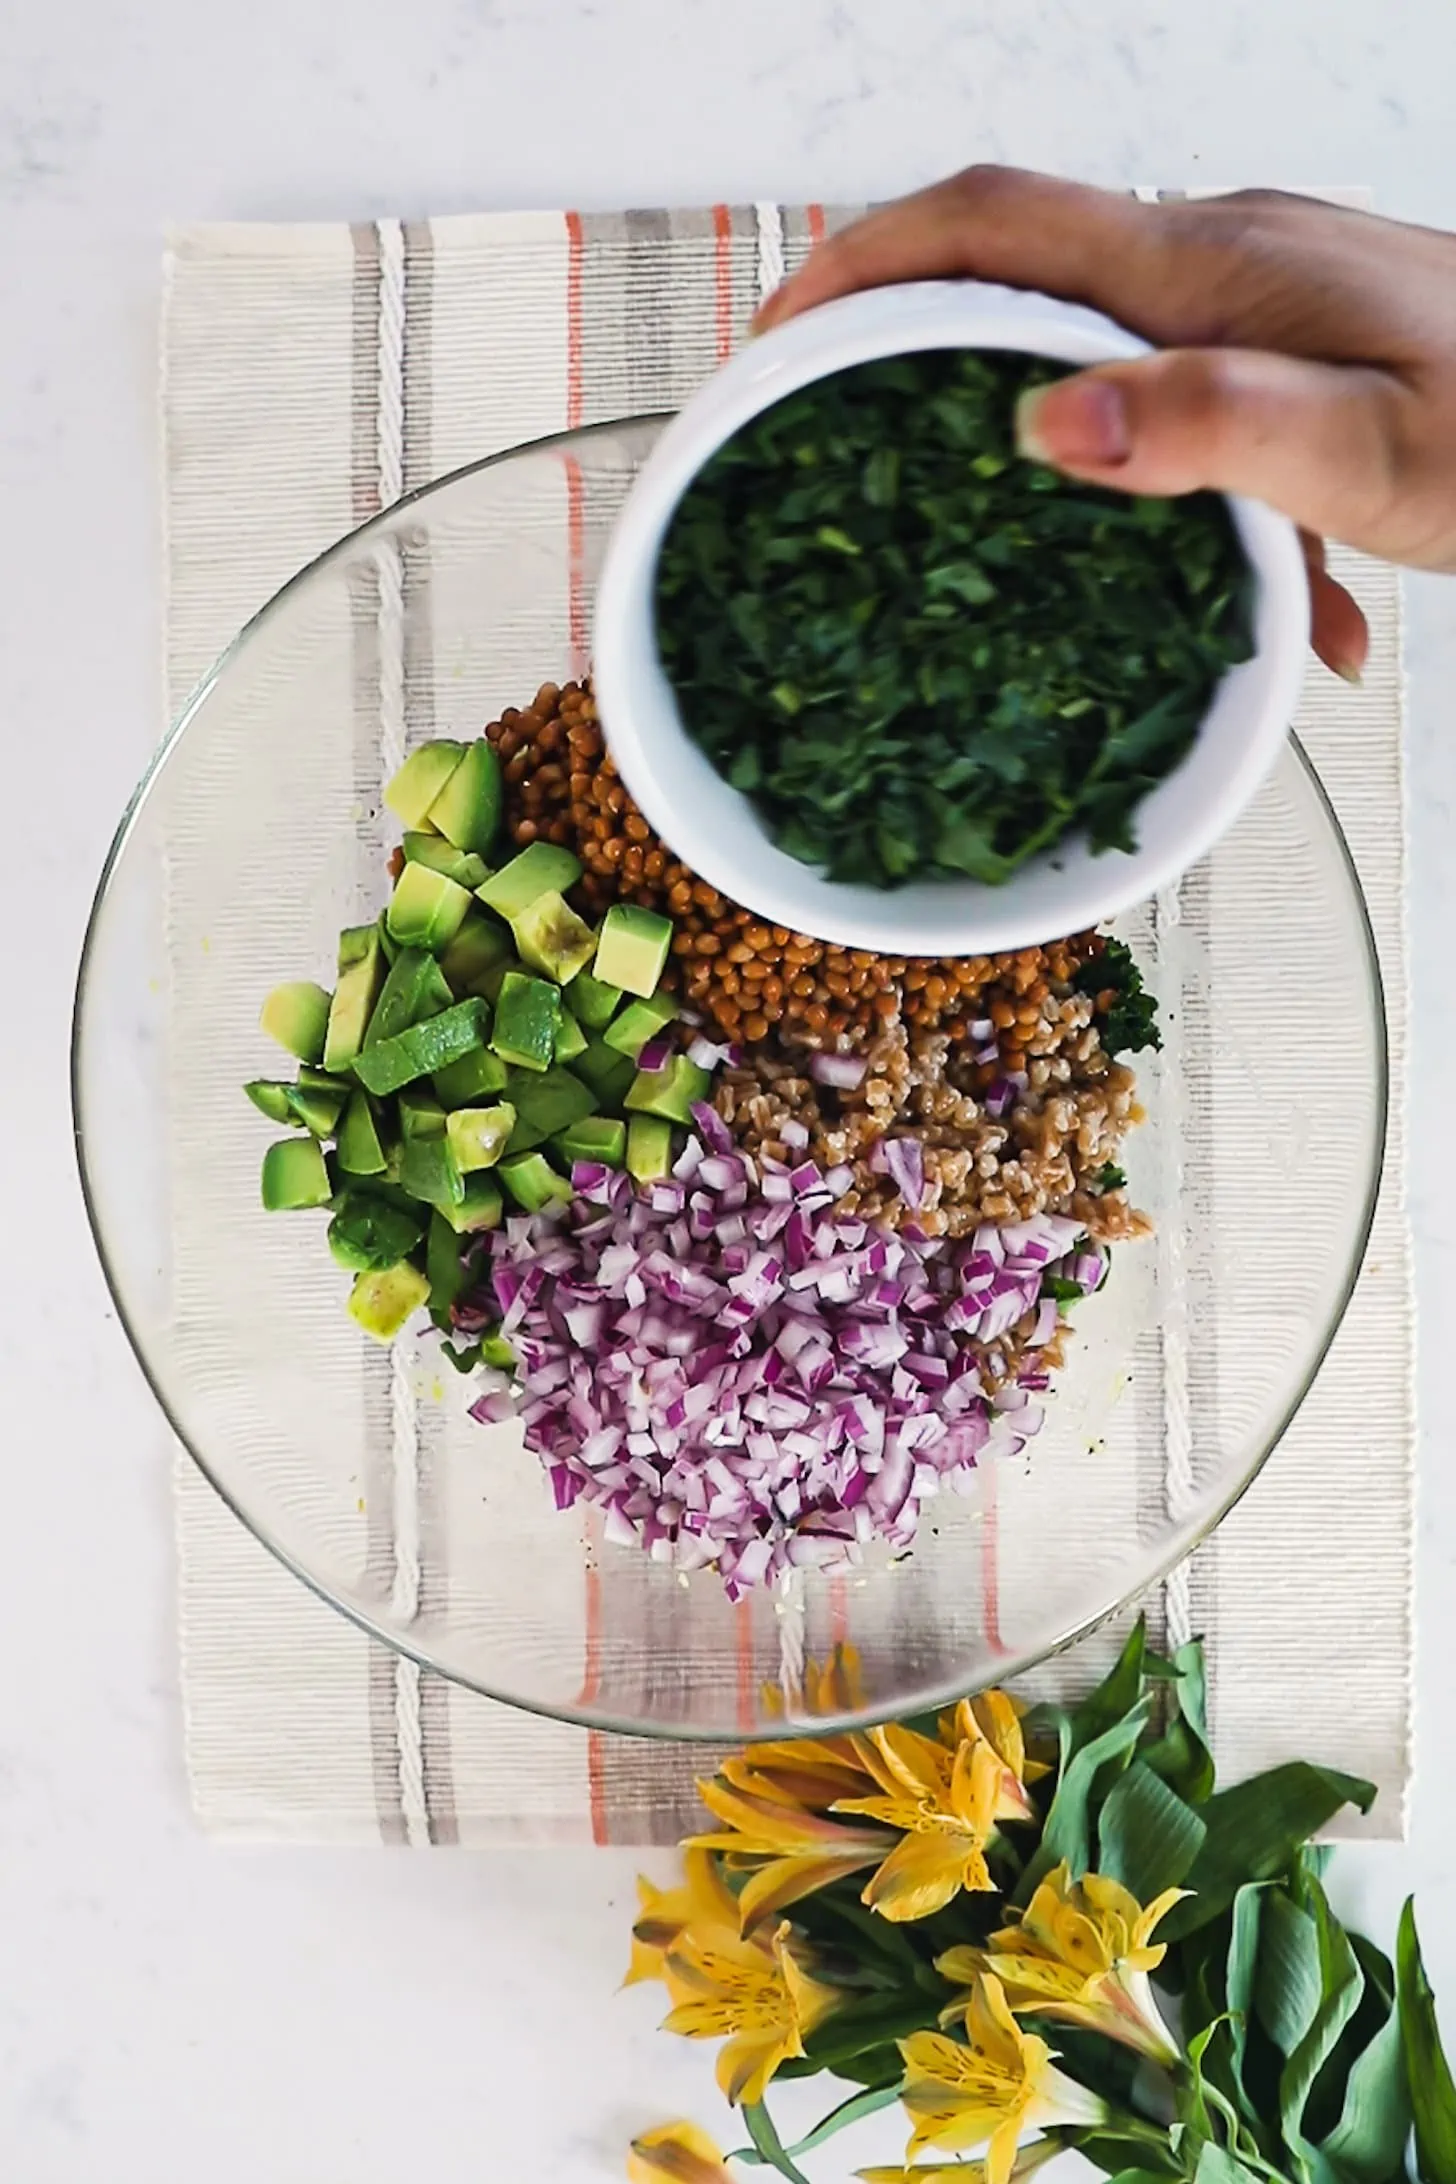 a hand holding a bowl of greens over a bowl of chopped onions, avocados and lentils.